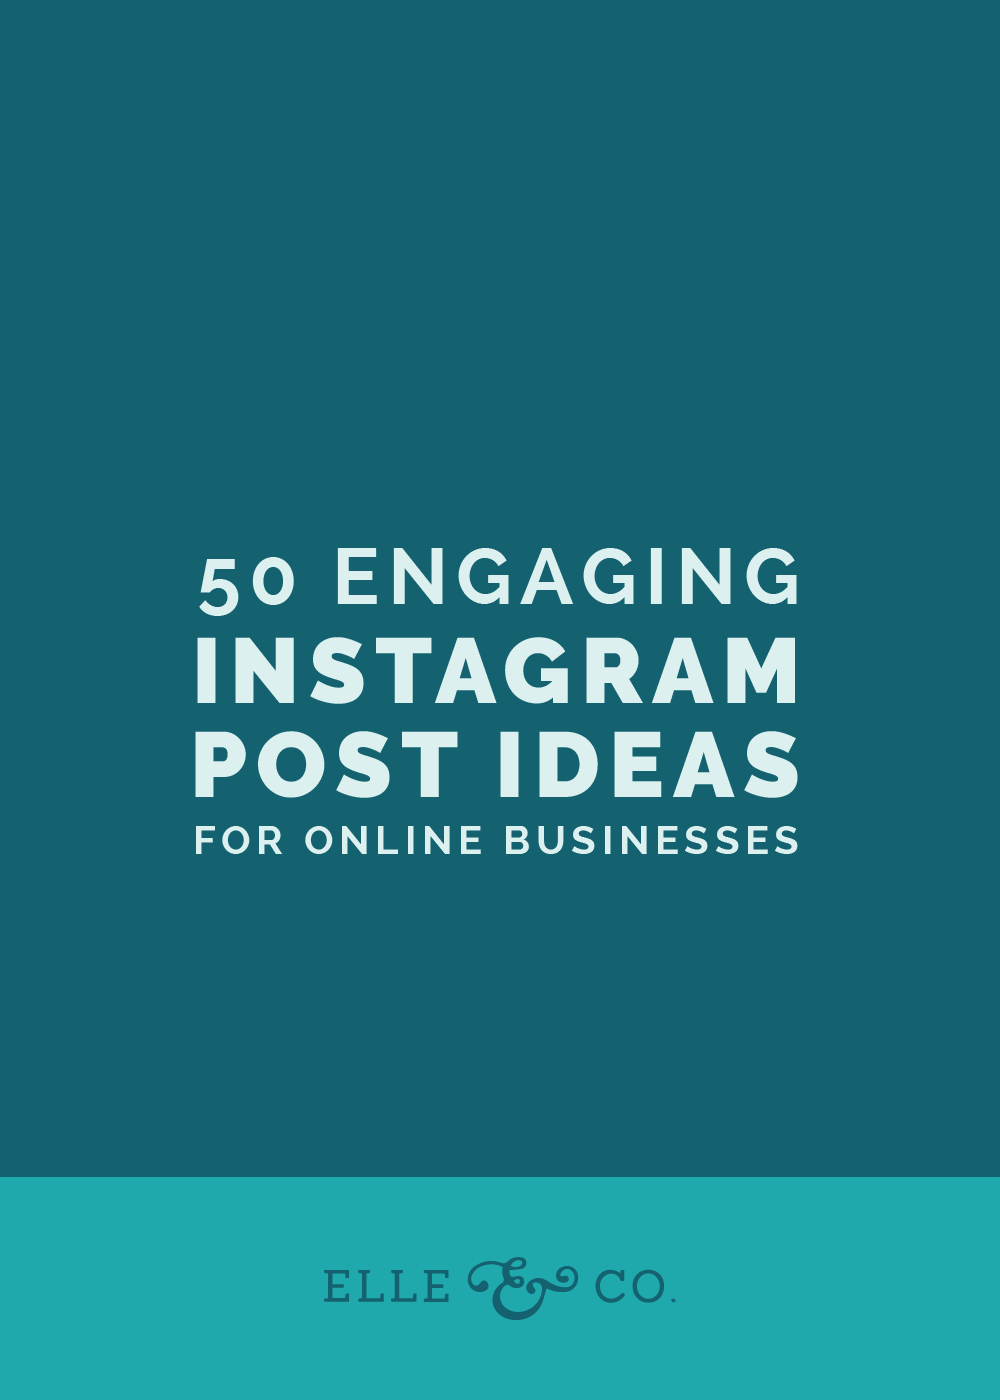 25 Engaging Instagram Post Ideas for Online Businesses